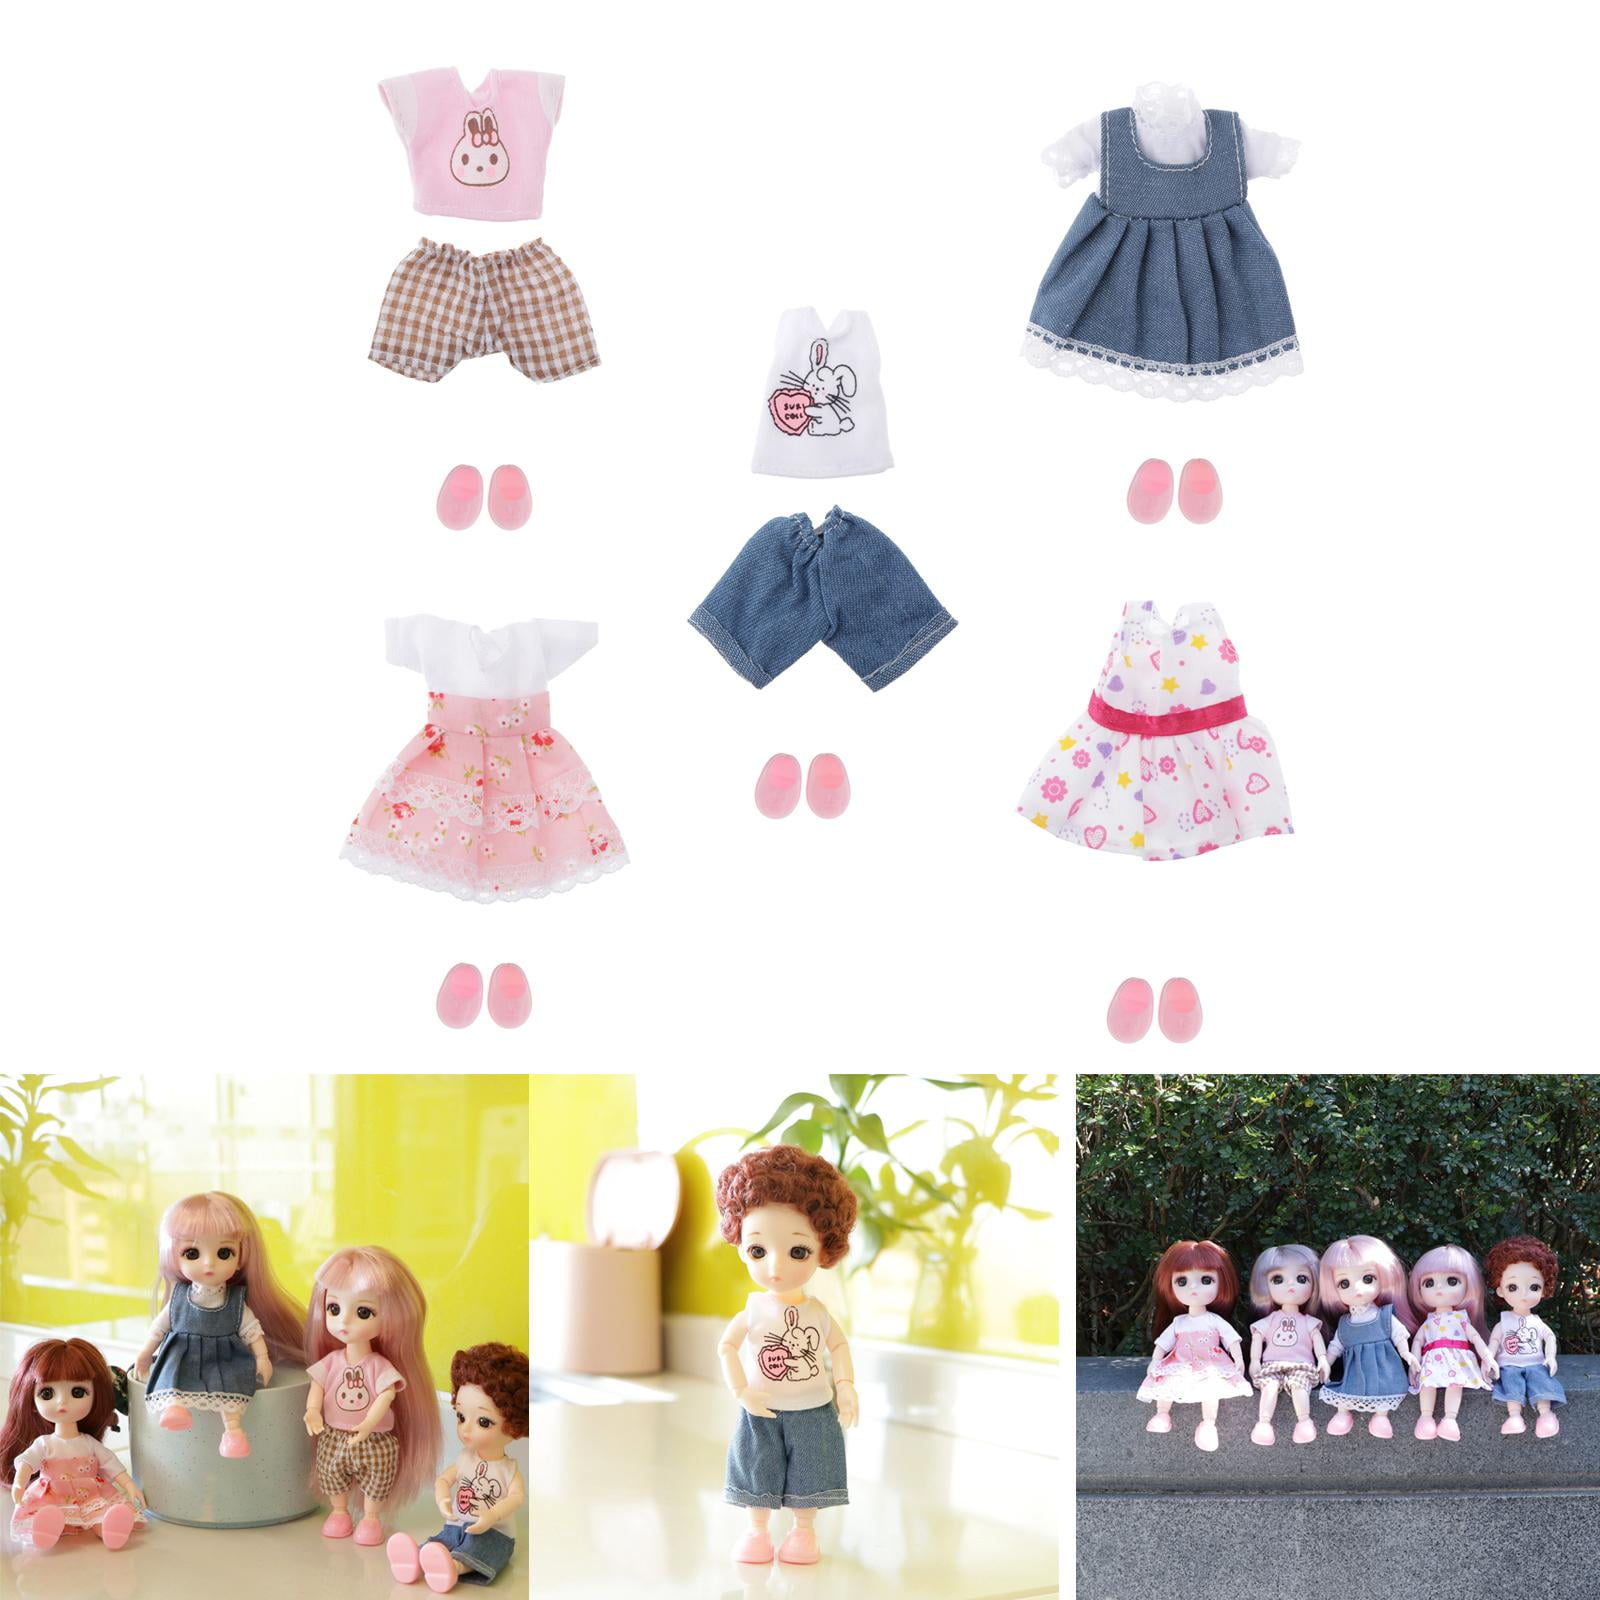 16 Pcs Doll Clothes and Accessories for Doll, 11.5 Inch Doll Outfit  Collection Including 3 Short Skirts 2 Sequin Skirts 2 Sets 3 Tops 3 Pants 3  Floral